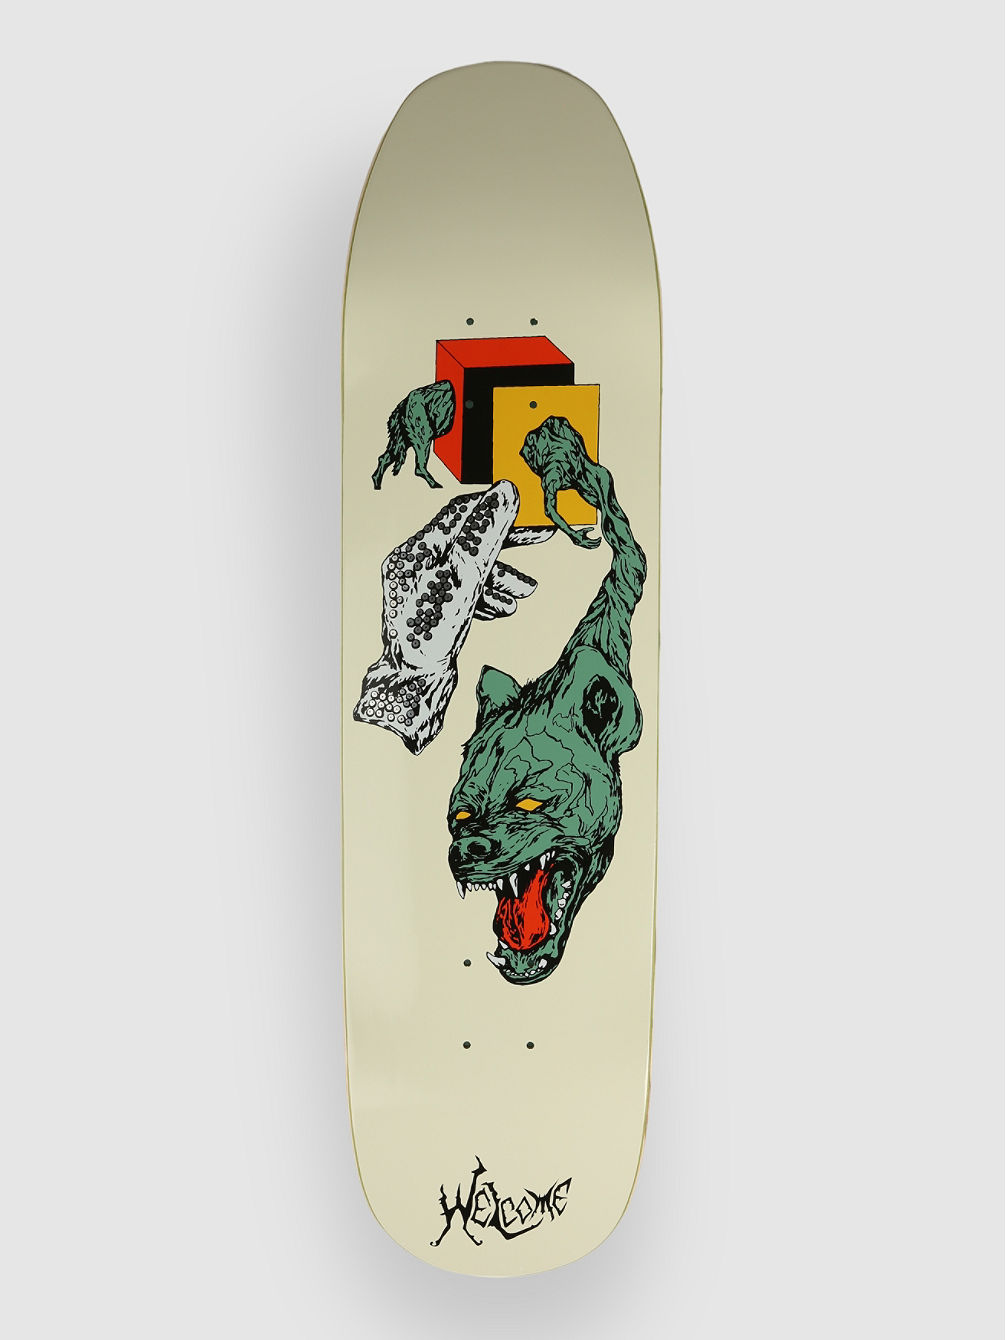 Face Of A Lover On Son Of Moontrim 8.25 Skateboard Deck